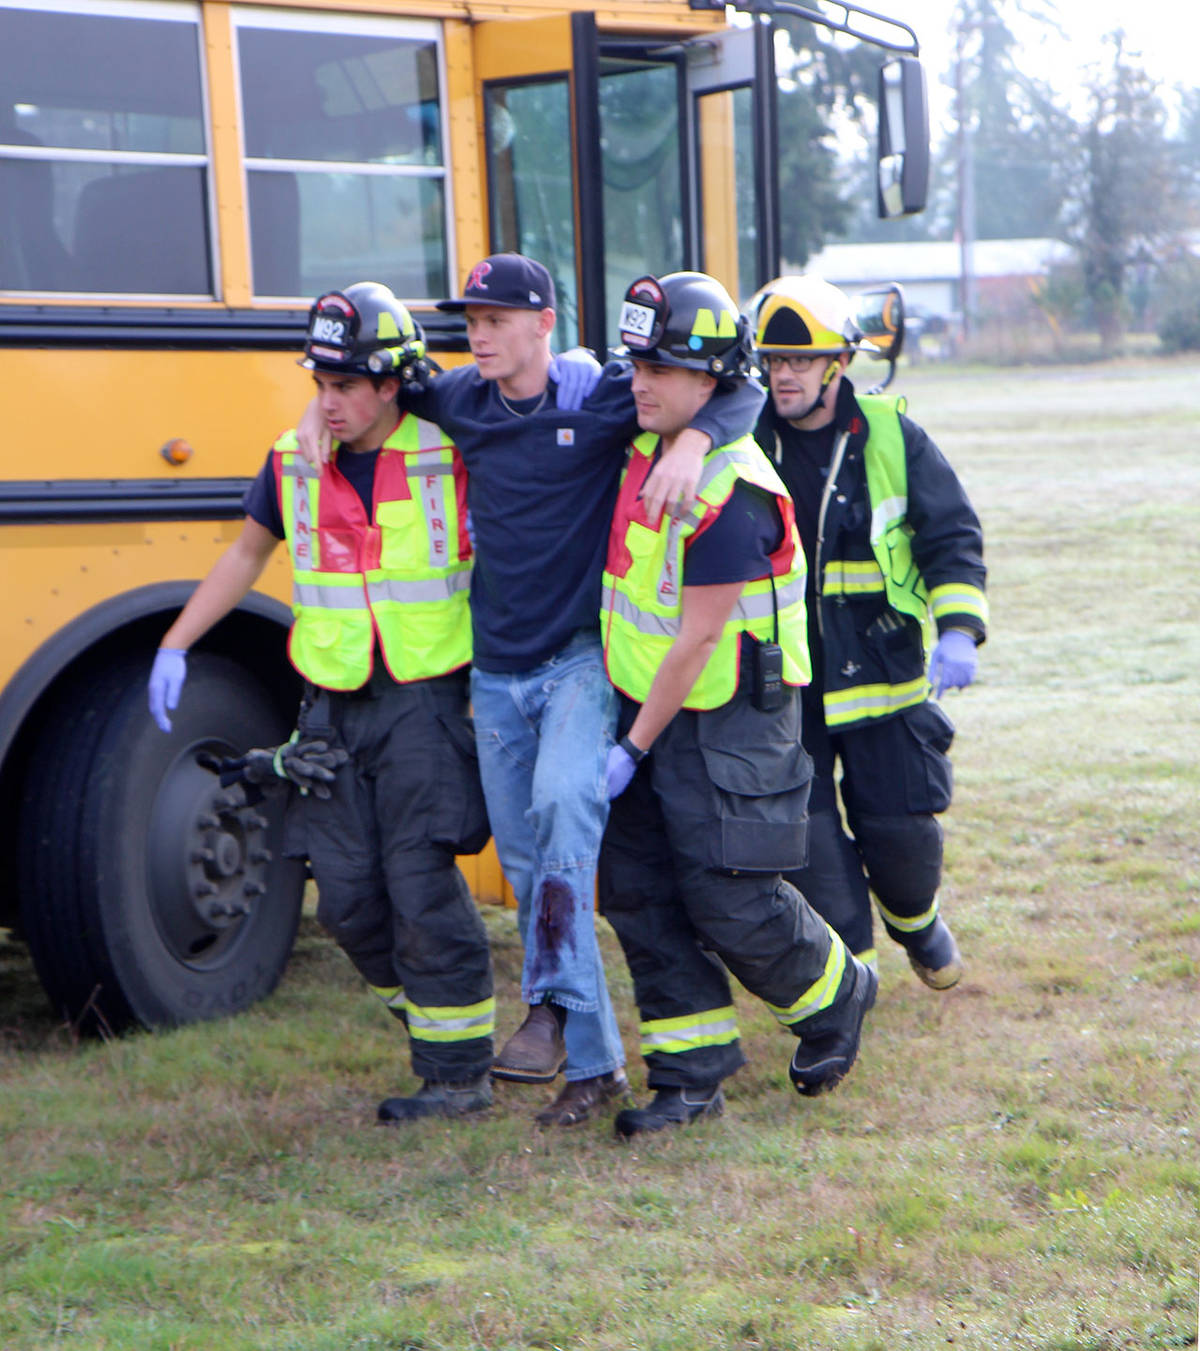 Michael Lang | Grays Harbor News Group                                First responders from multiple jurisdictions assist in evacuating an Elma High School student from a bus during an emergency preparedness drill for multiple emergency responder agencies Wednesday, Oct. 23, at the Grays Harbor County Fairgrounds in Elma. The student was pretending to have been injured during a roll over crash of the bus.